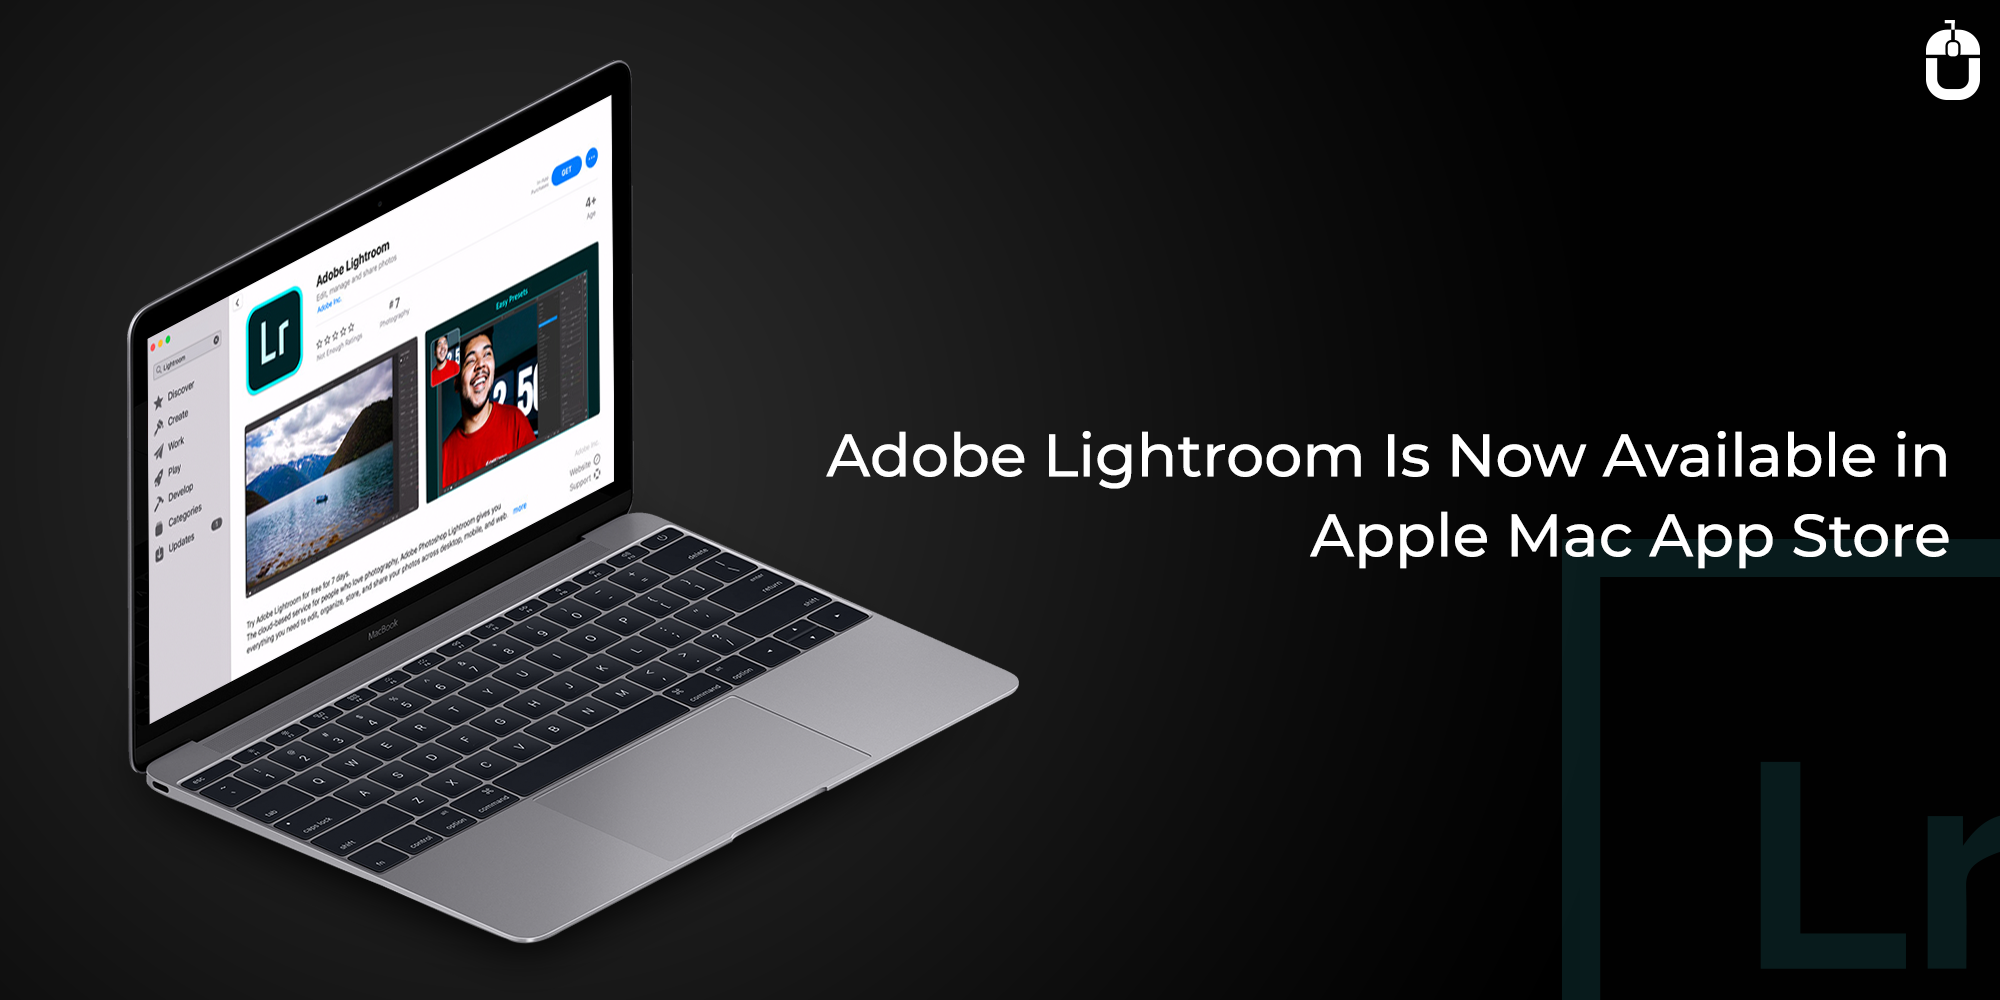 Adobe Lightroom Is Now Available In Apple Mac App Store